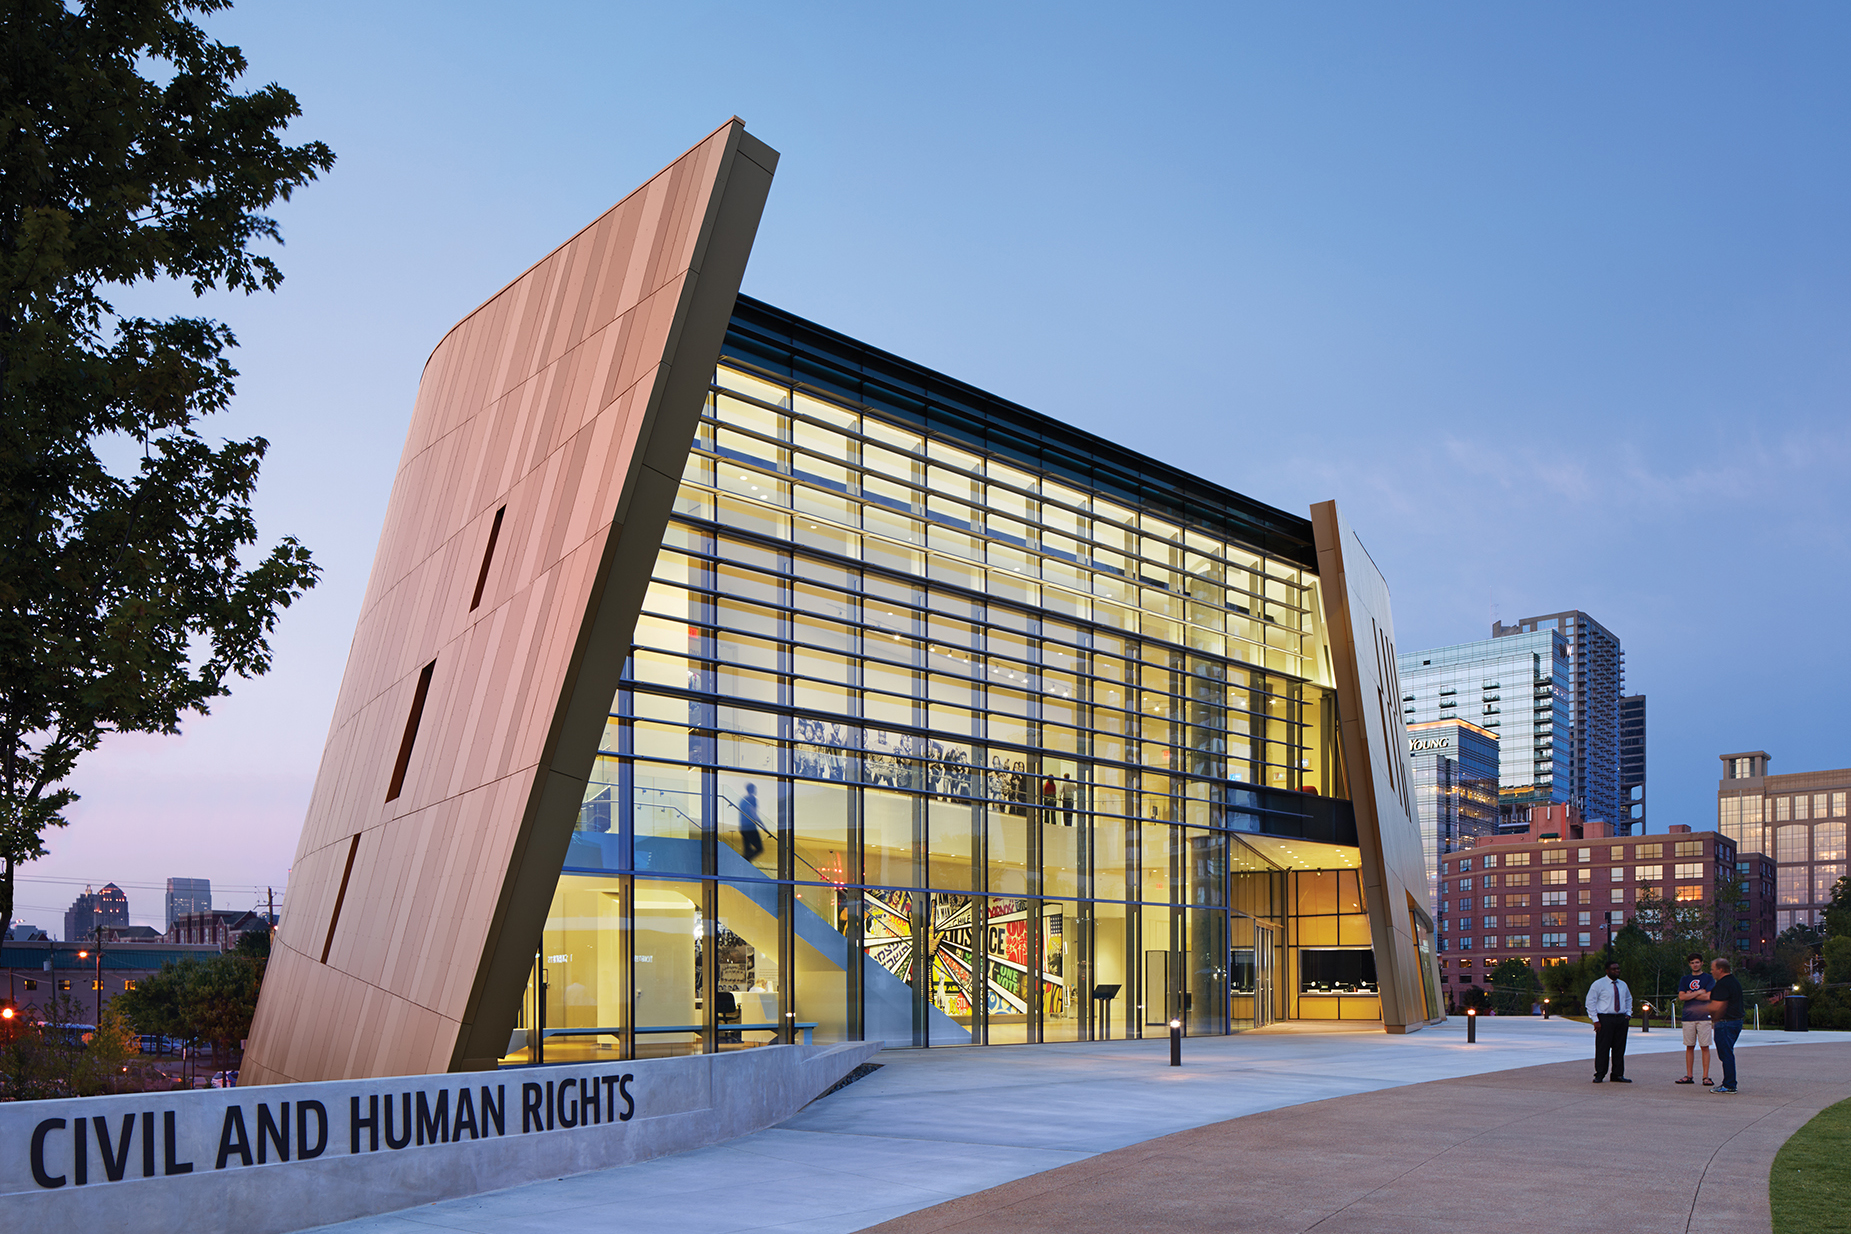 NATIONAL CENTER FOR CIVIL AND HUMAN RIGHTS